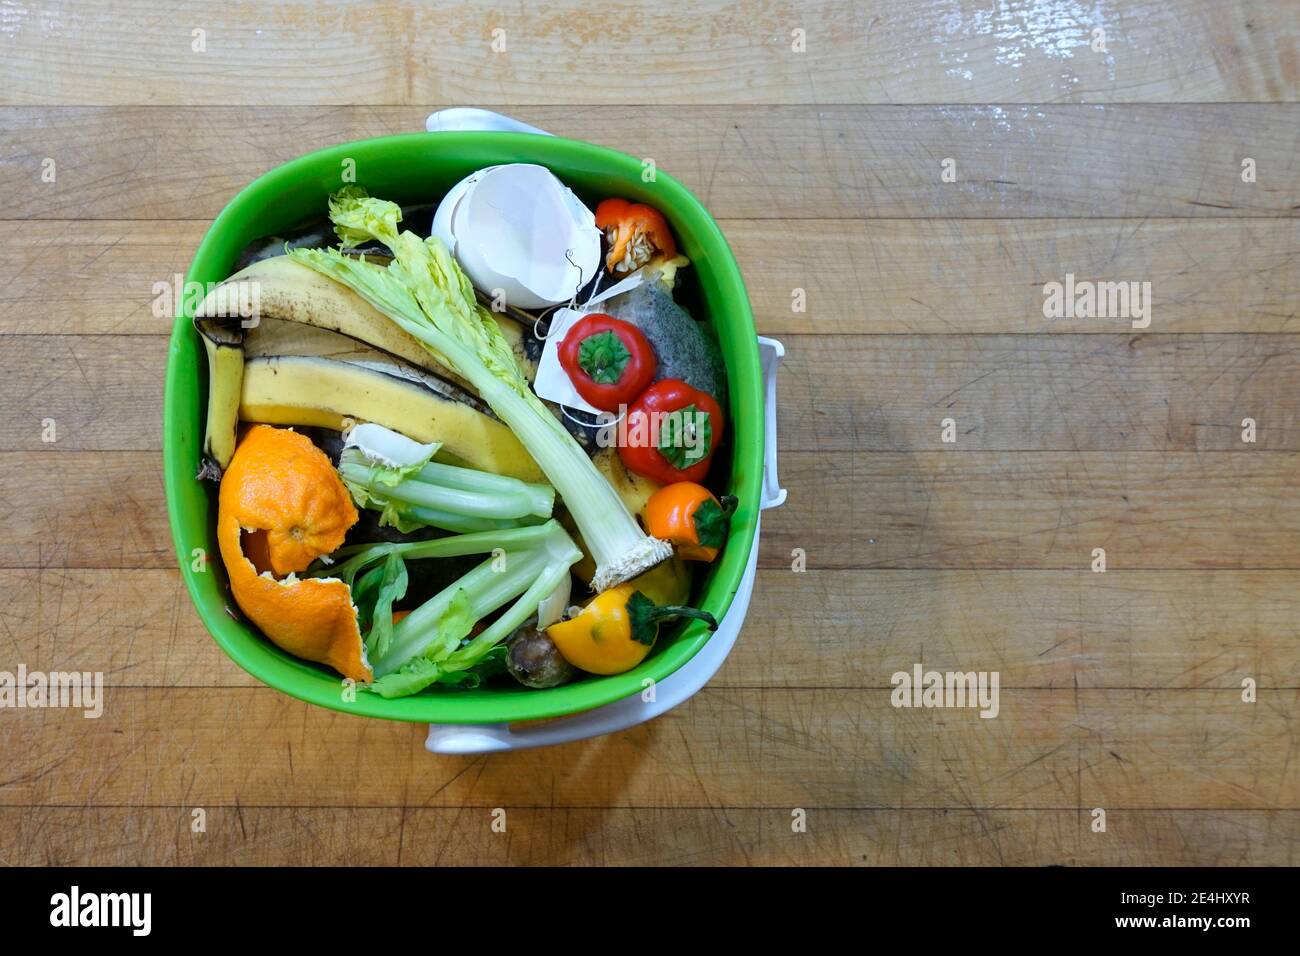 Top-view of kitchen scraps in a container ready for composting Stock Photo